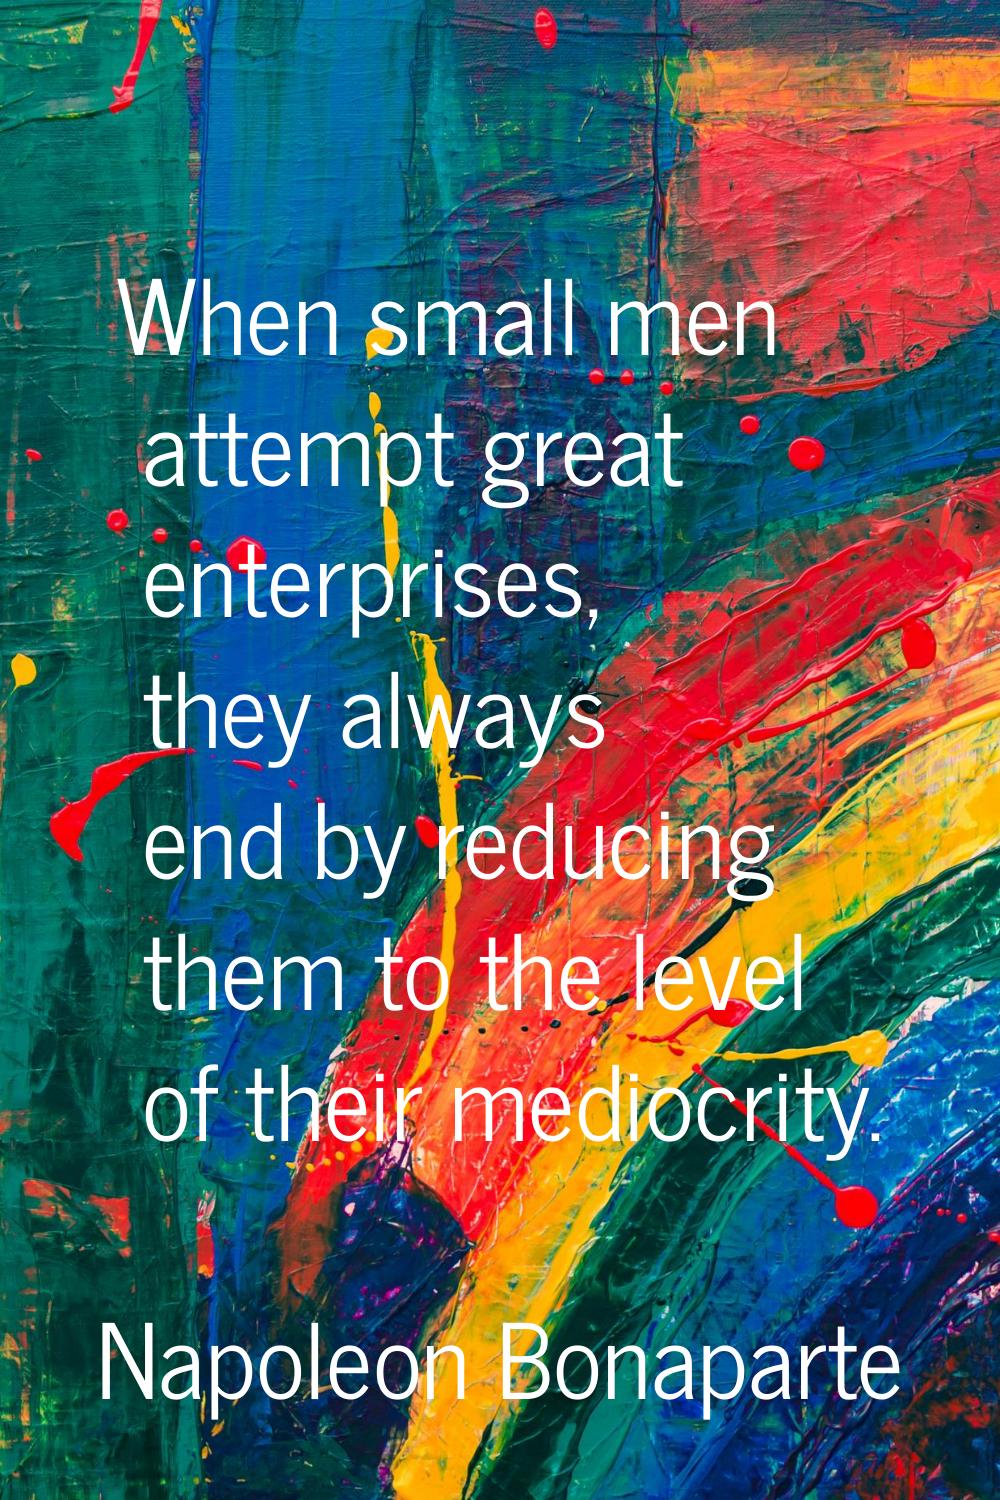 When small men attempt great enterprises, they always end by reducing them to the level of their me